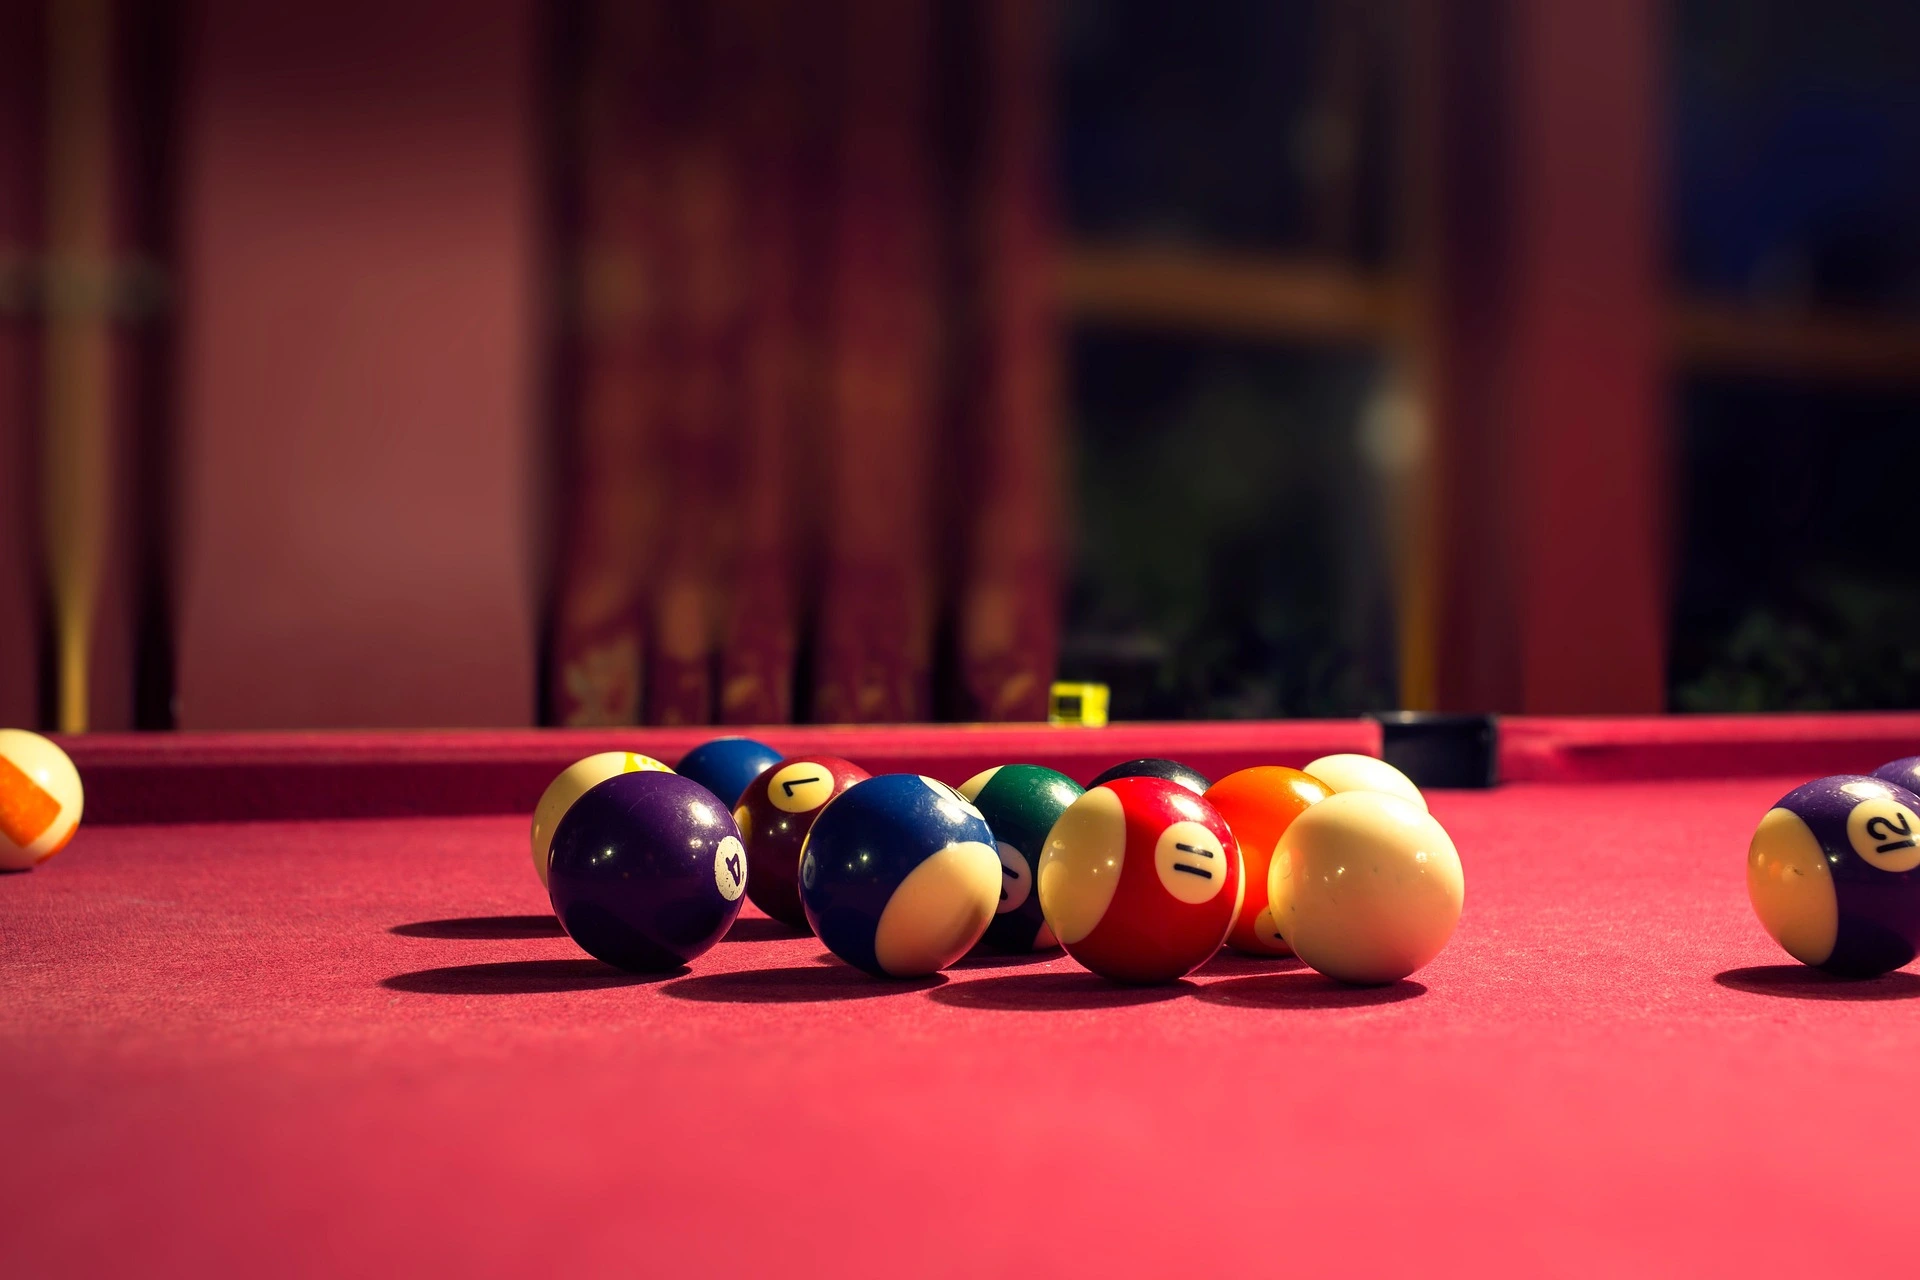 Games and Snooker